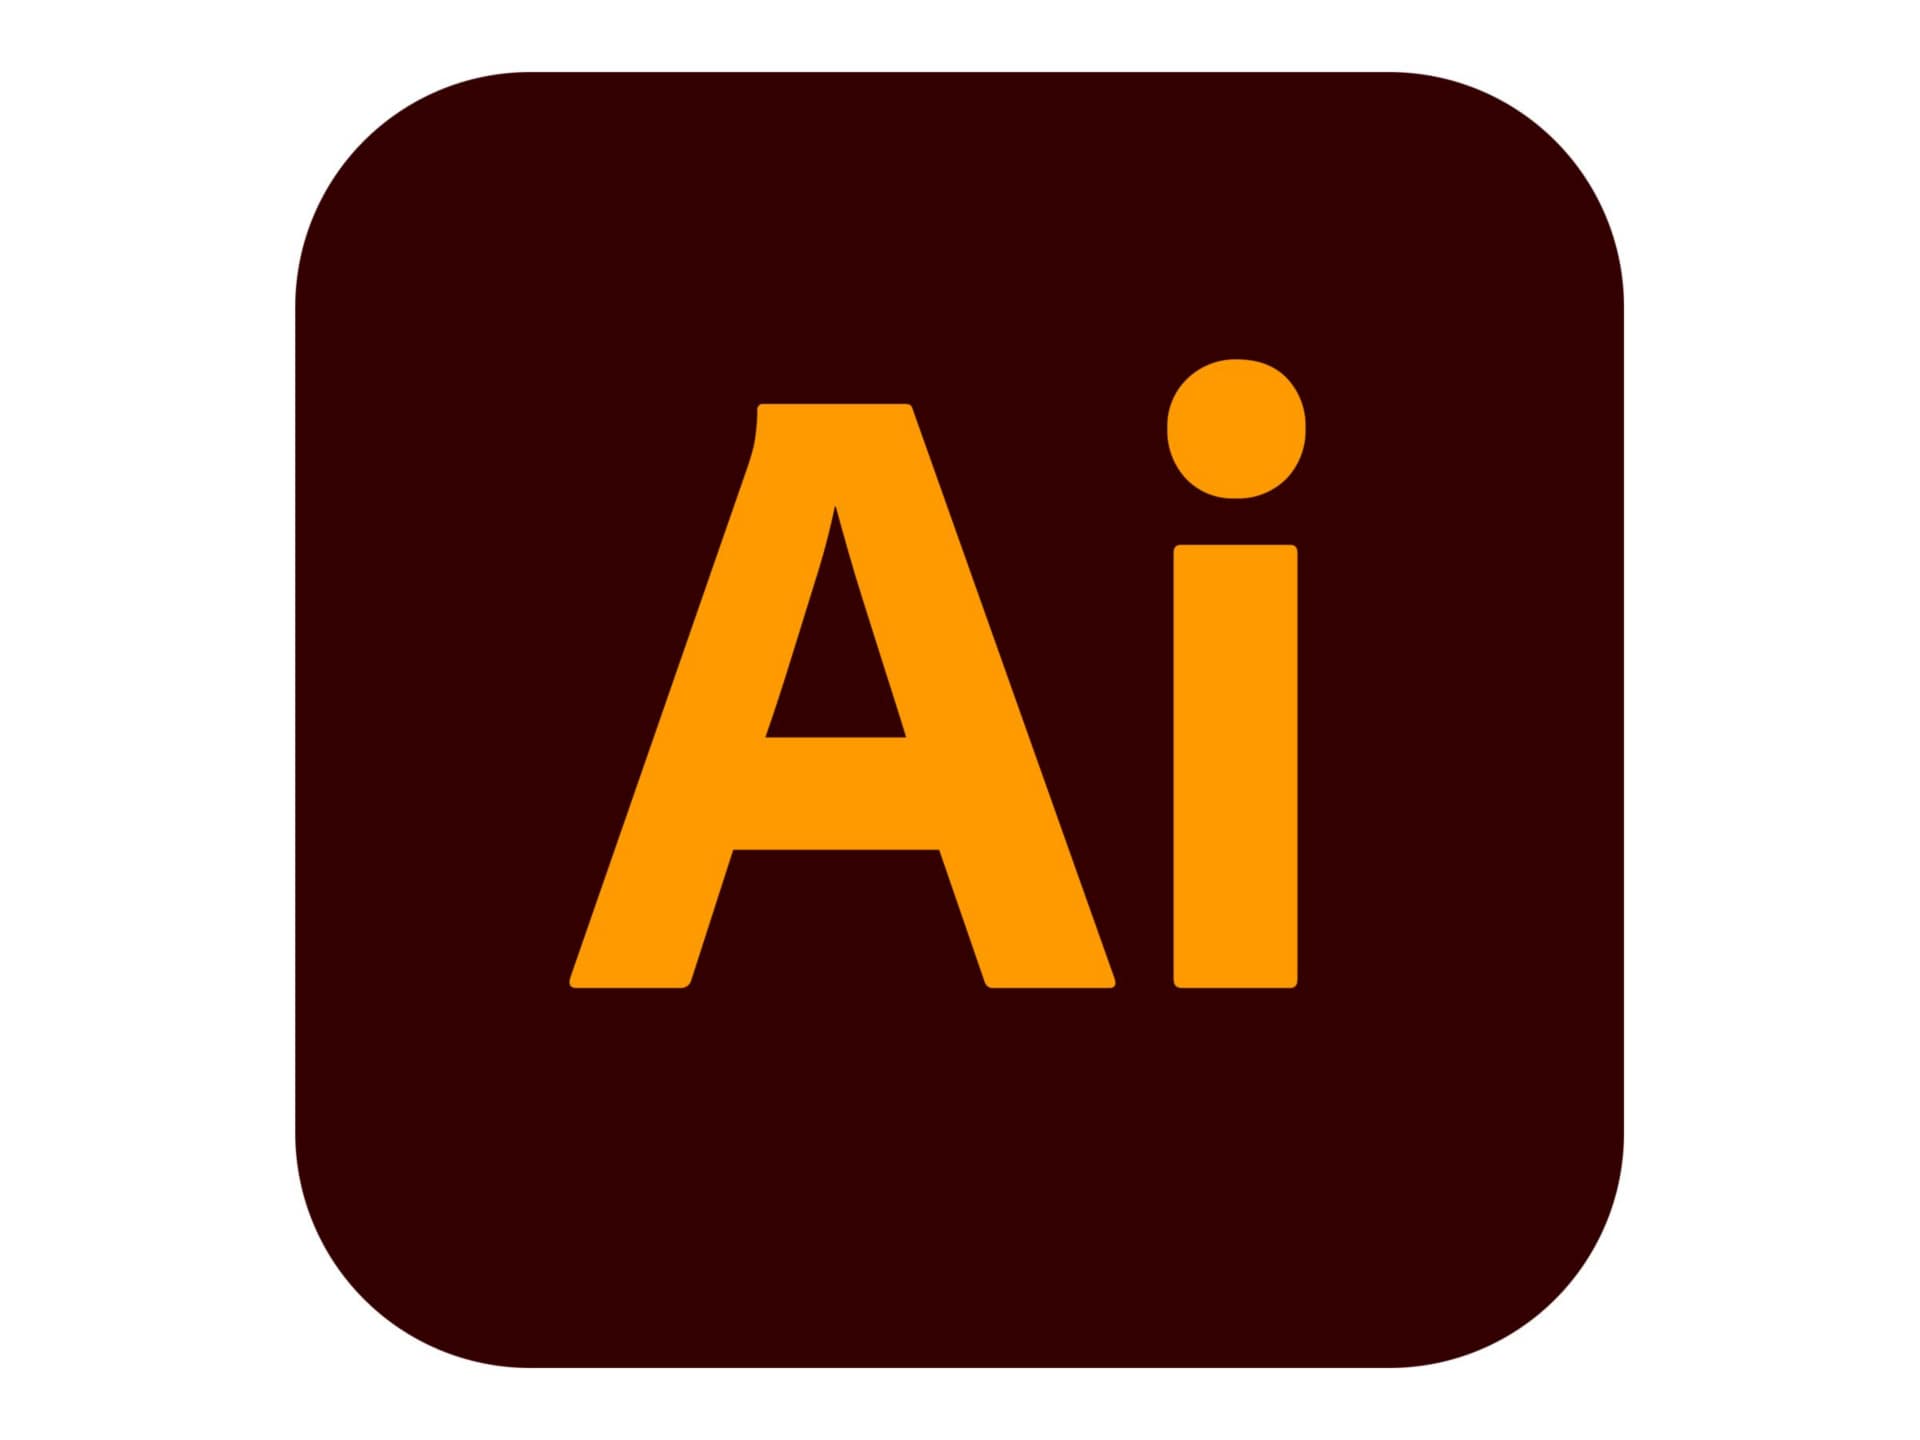 Adobe Illustrator Pro for teams - Subscription New (11 months) - 1 user